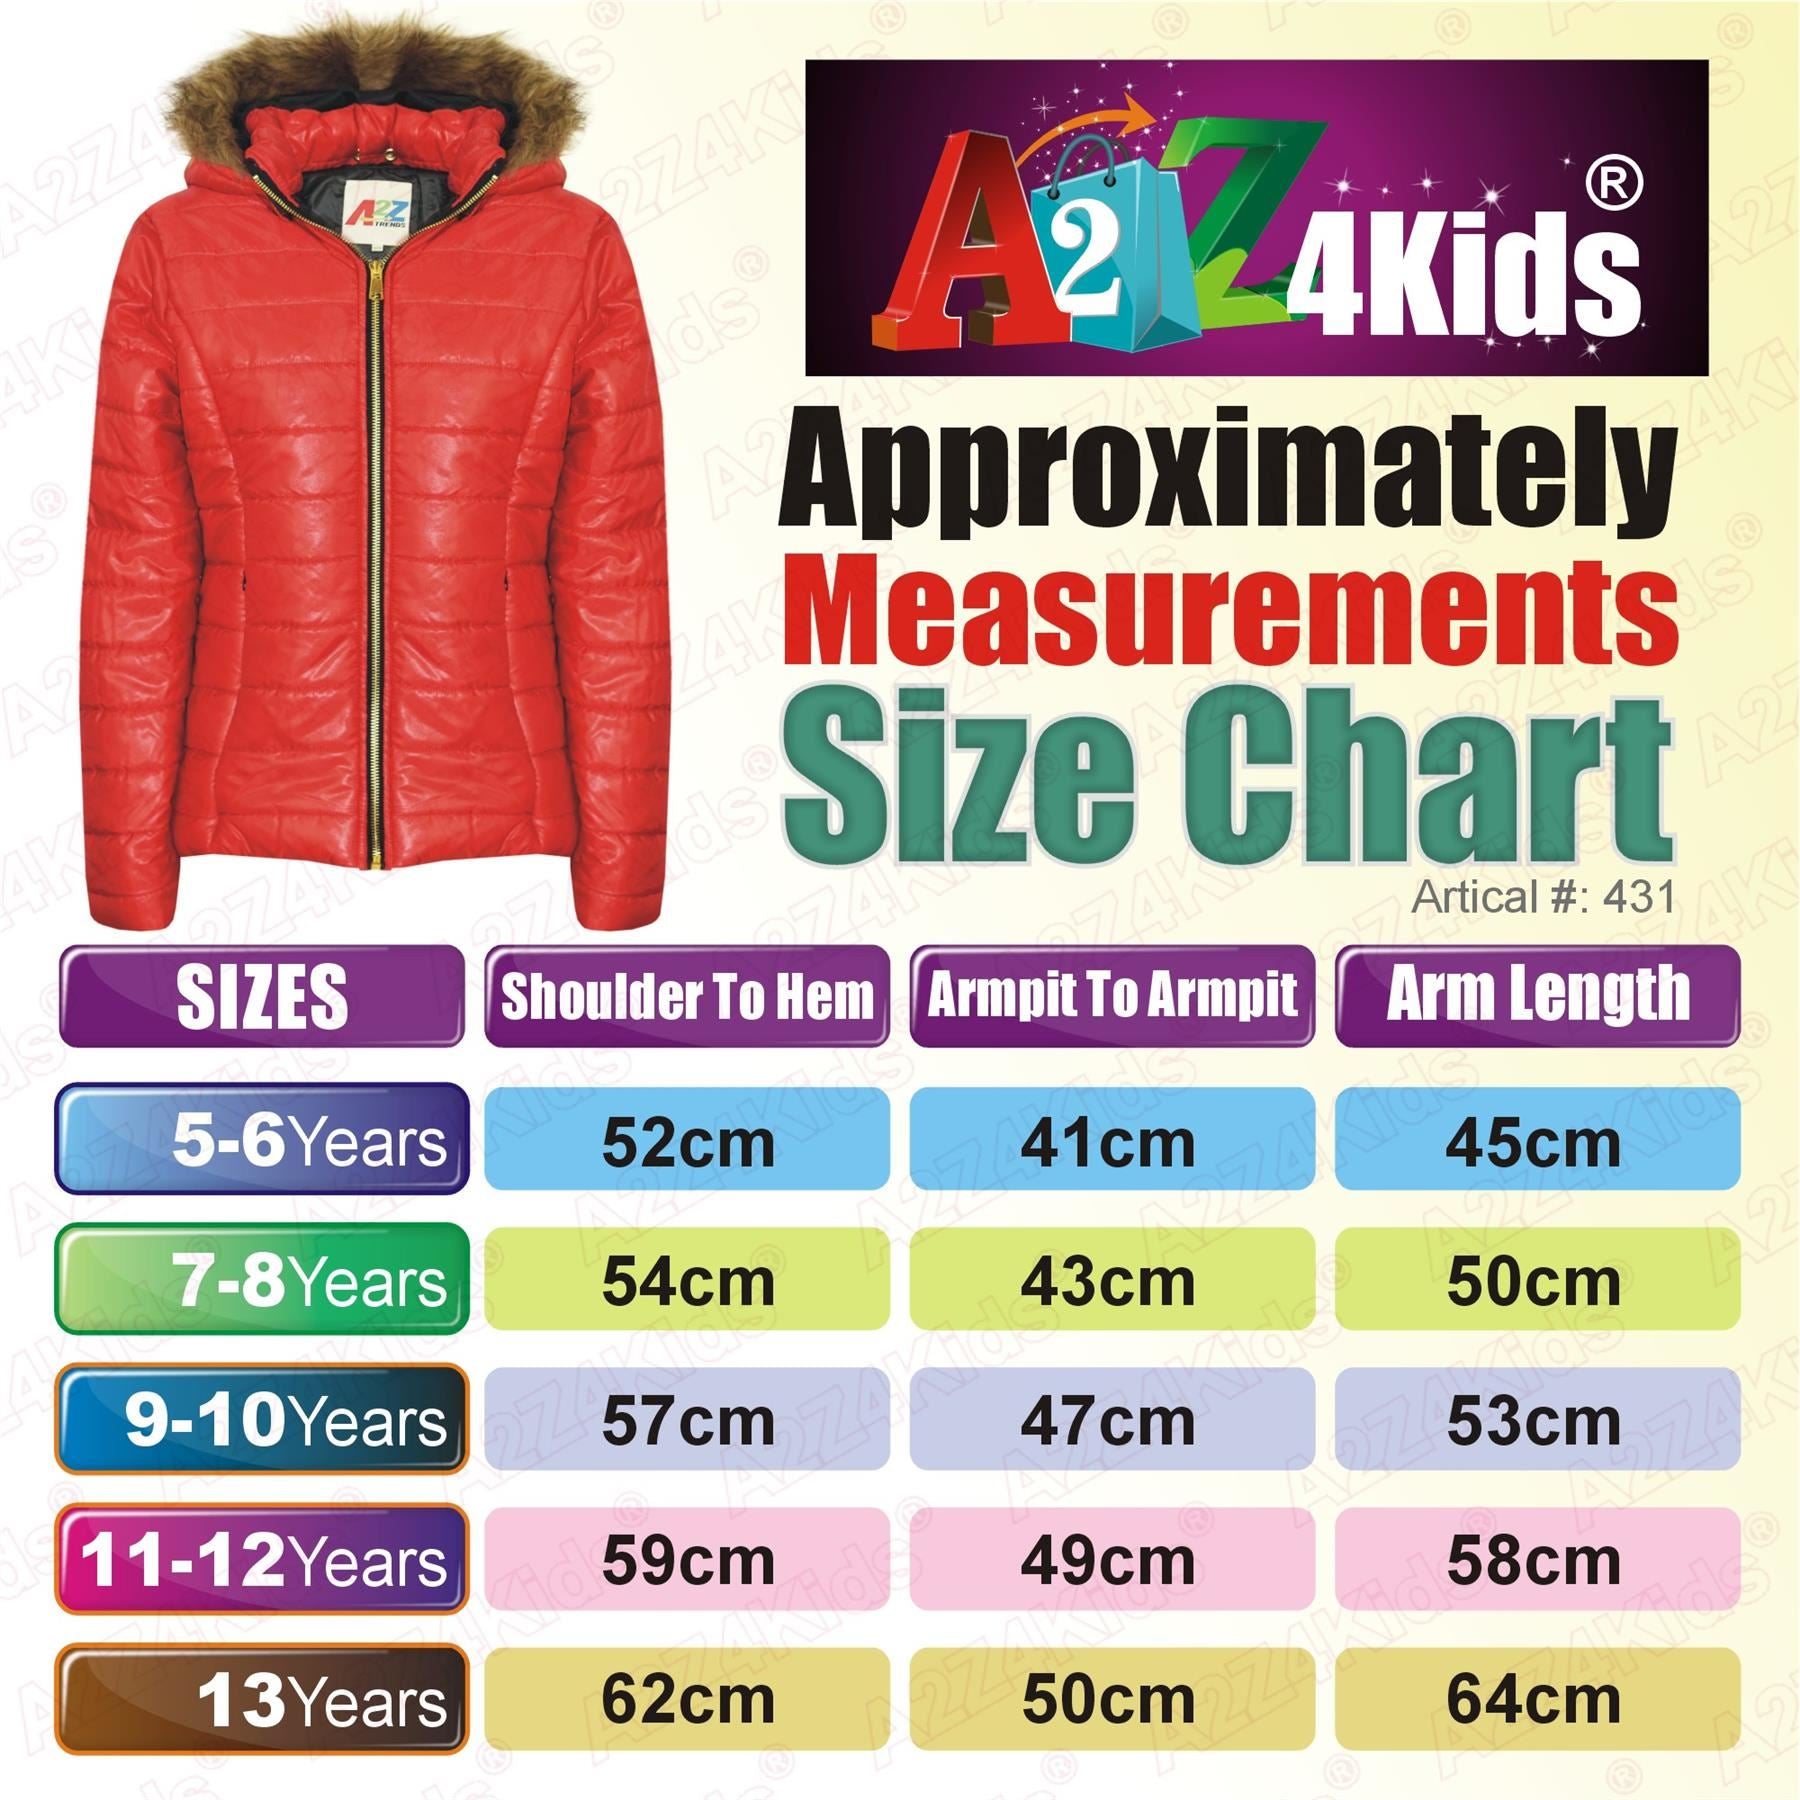 Kids Girls Jackets Red Puffer Padded Quilted Detachable Hood Faux Fur Top Coats